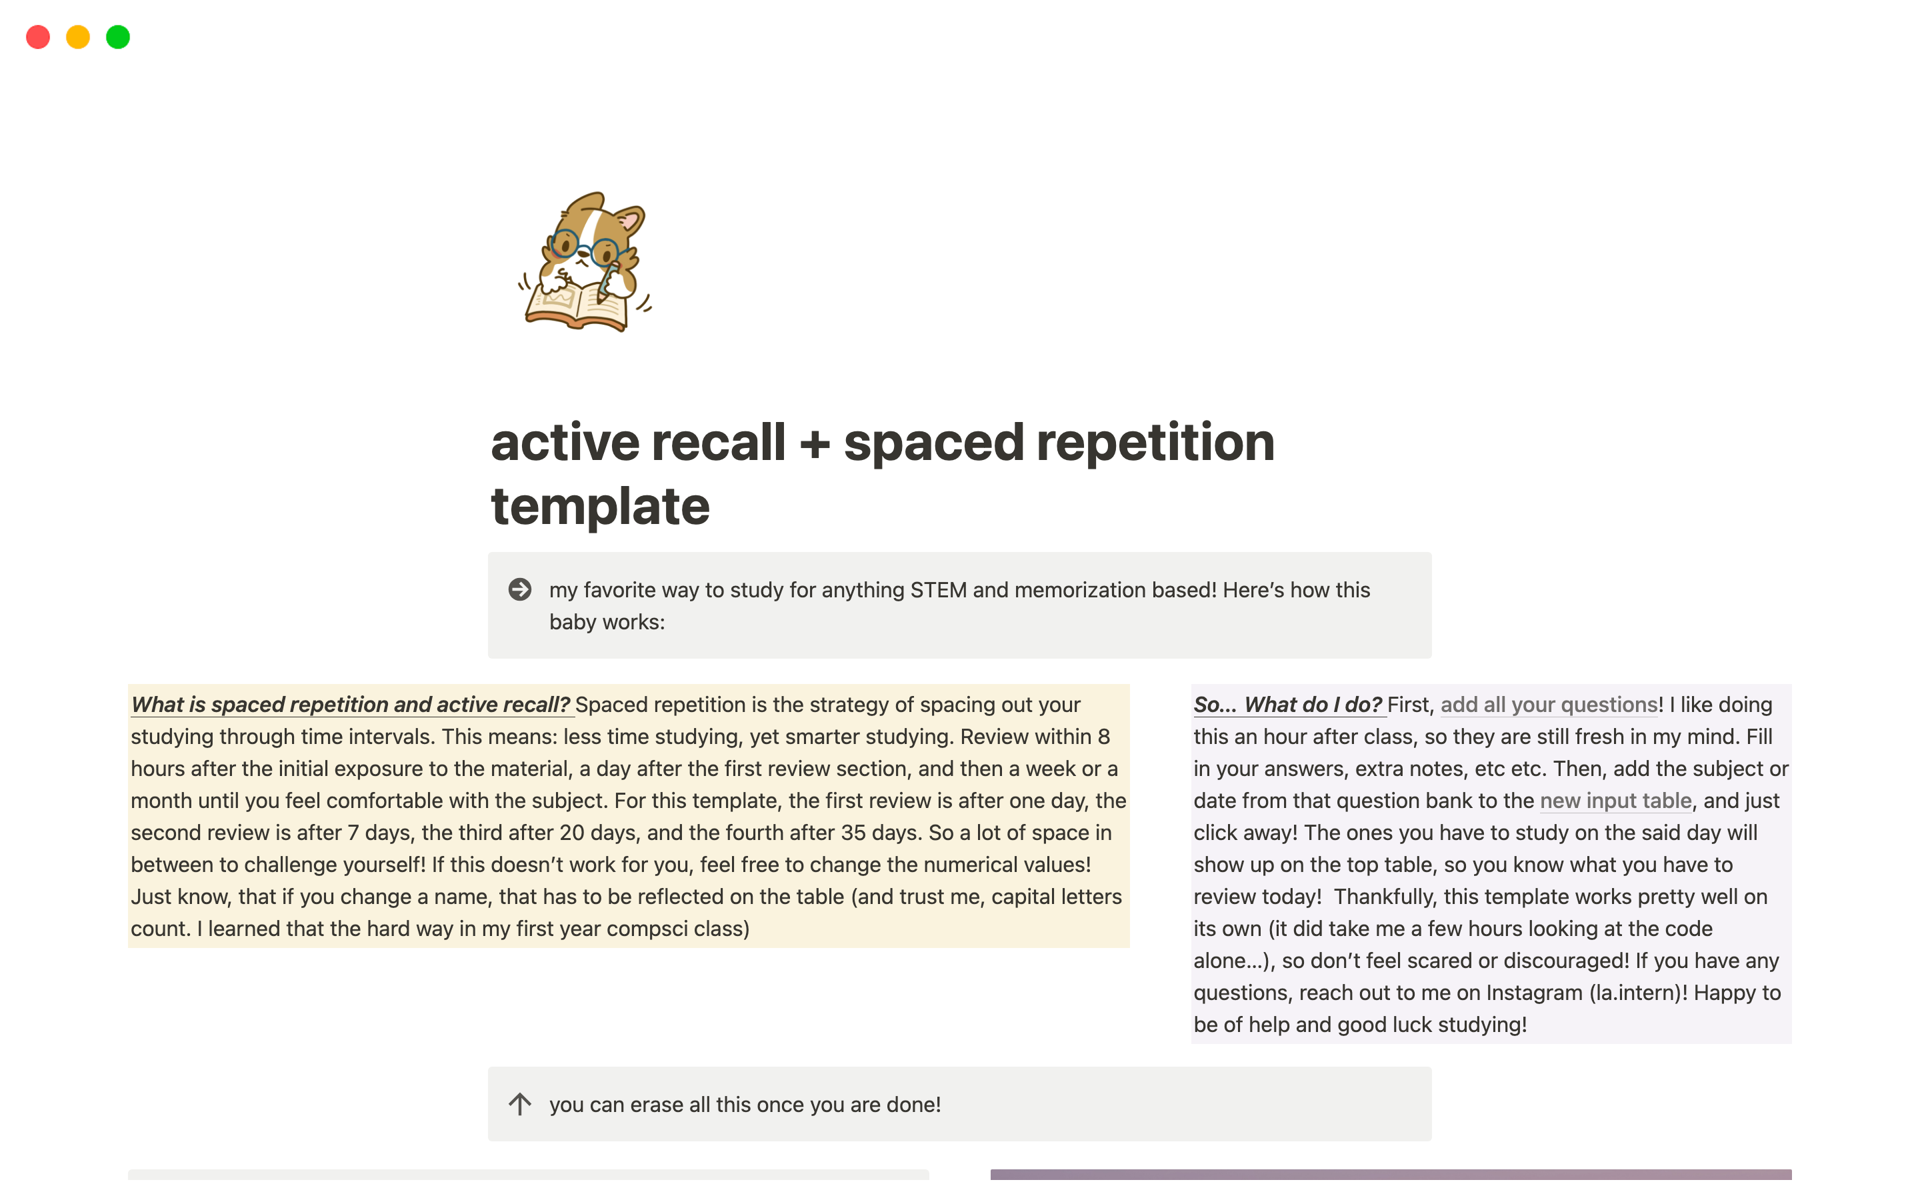 active recall + spaced repetition templateのテンプレートのプレビュー